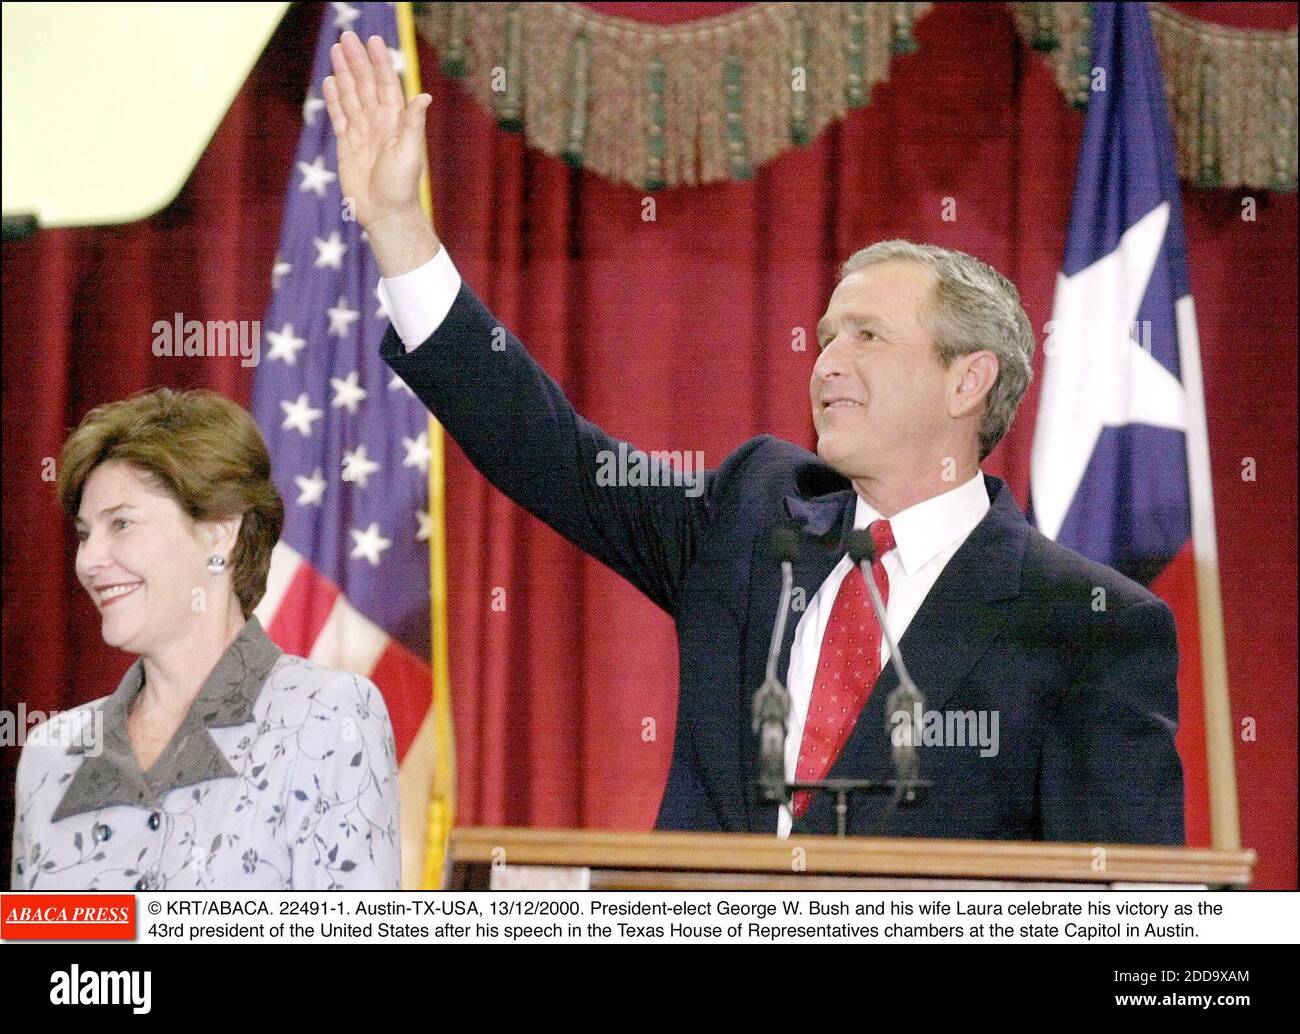 NO FILM, NO VIDEO, NO TV, NO DOCUMENTARY - © KRT/ABACA. 22491-1. Austin-TX-USA, 13/12/2000. President-elect George W. Bush and his wife Laura celebrate his victory as the 43rd president of the United States after his speech in the Texas House of Representatives chambers at the state Capitol in Aus Stock Photo